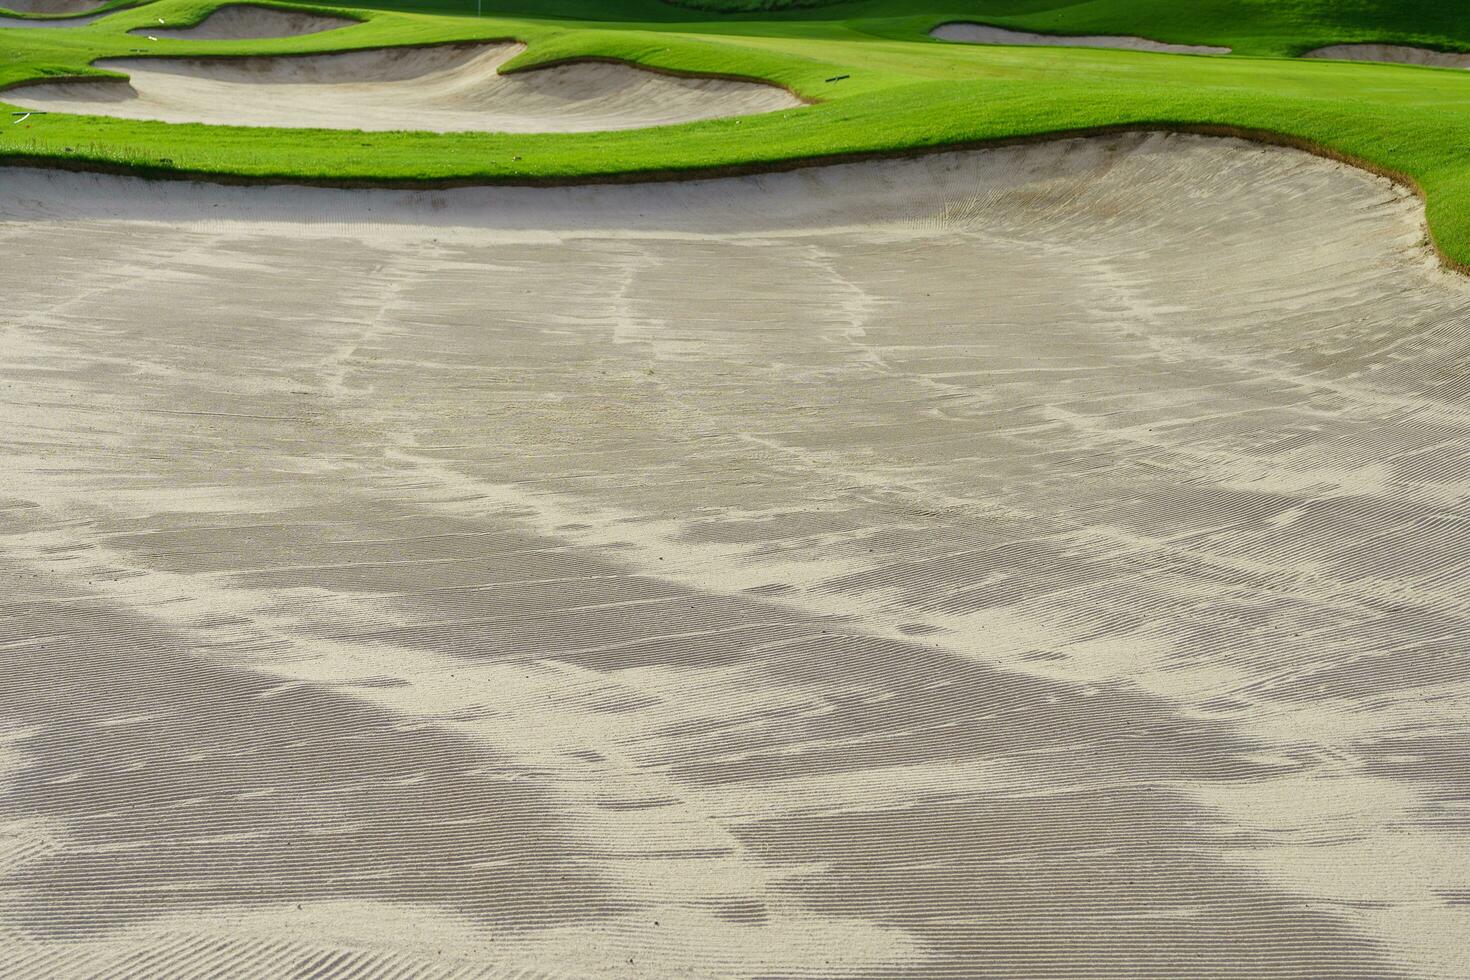 Golf Course Sand Pit Bunkers, green grass surrounding the beautiful sand holes is one of the most challenging obstacles for golfers and adds to the beauty of the golf course. photo